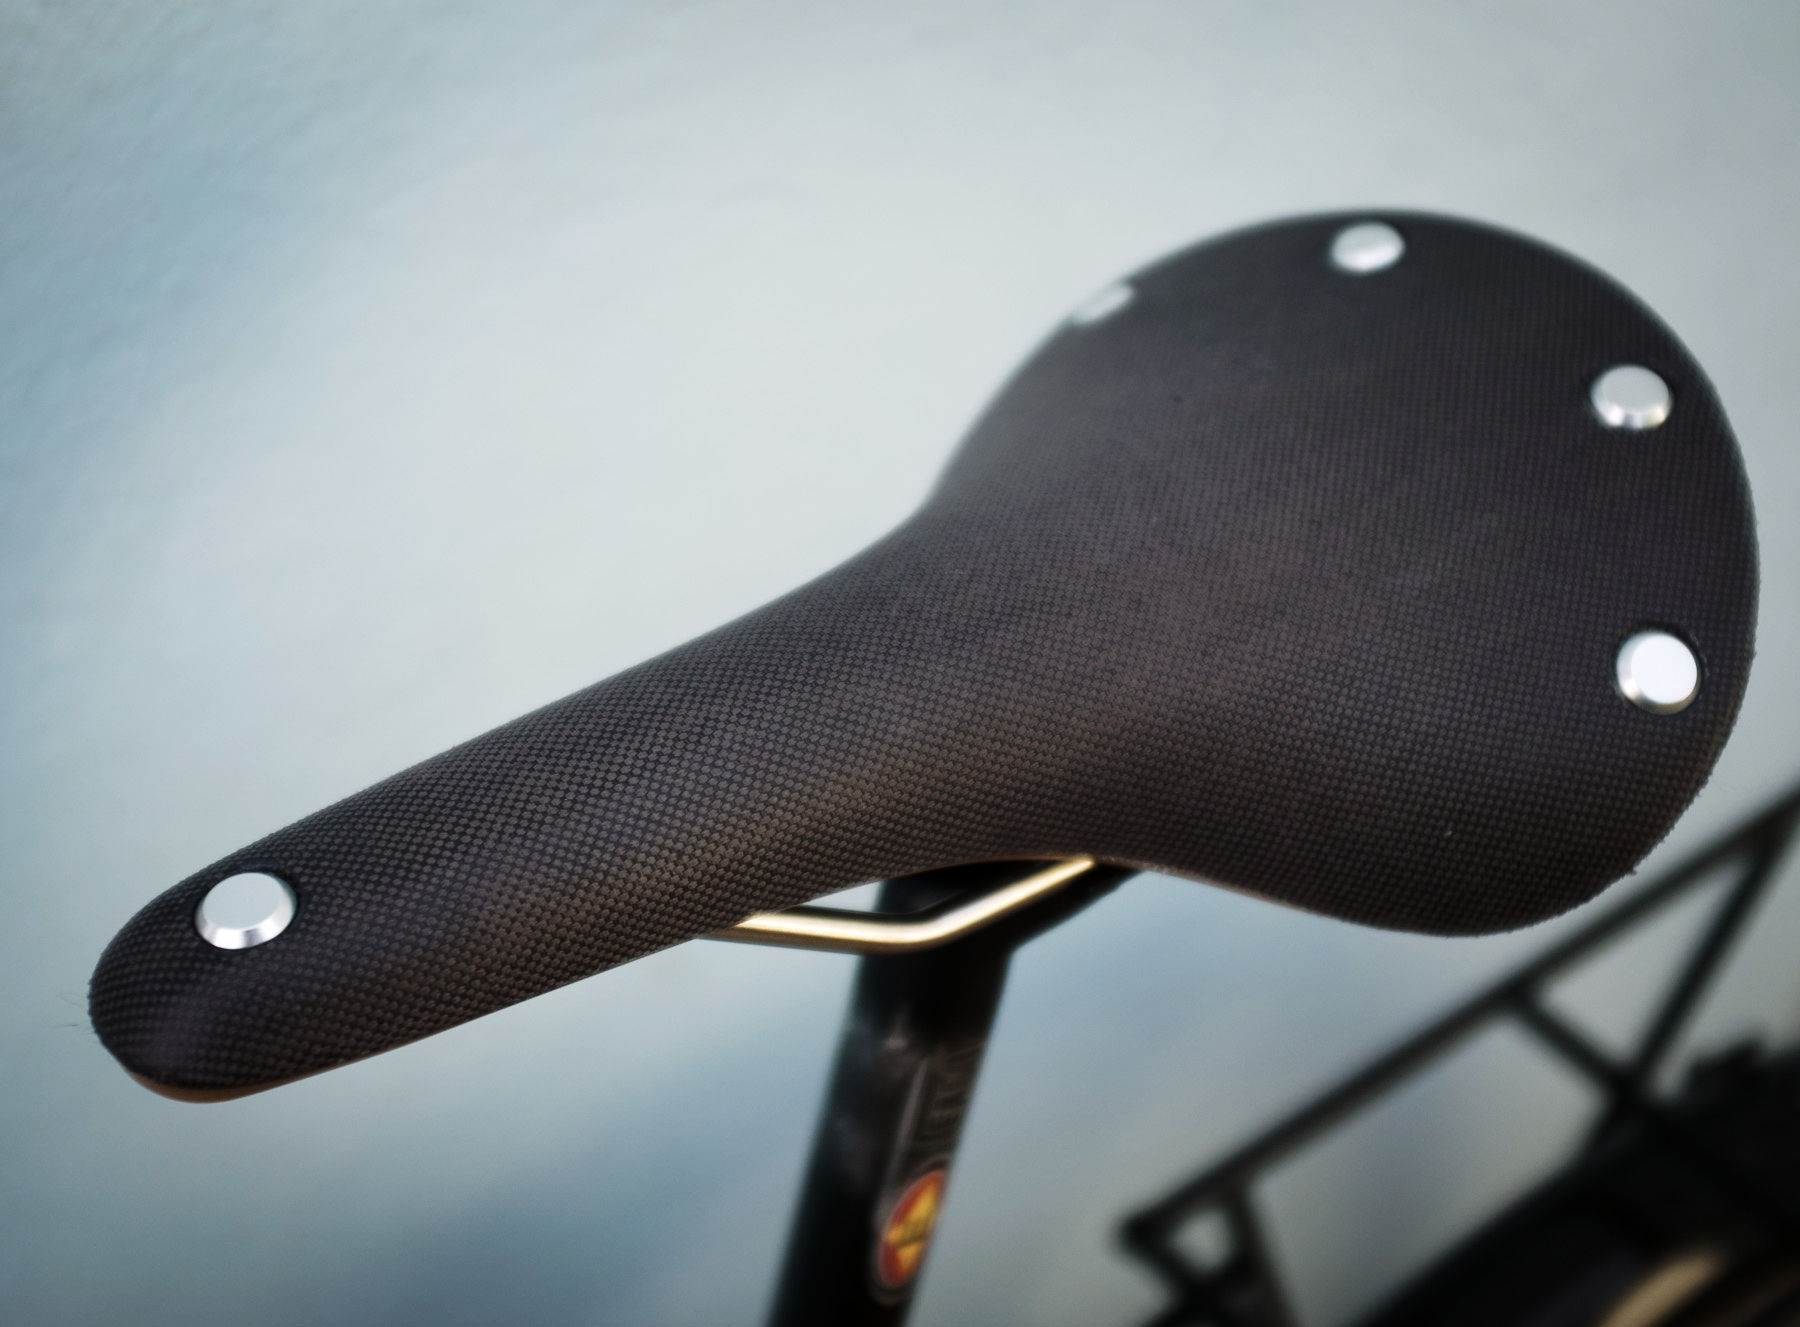 Brooks Cambium. A present for my backside.